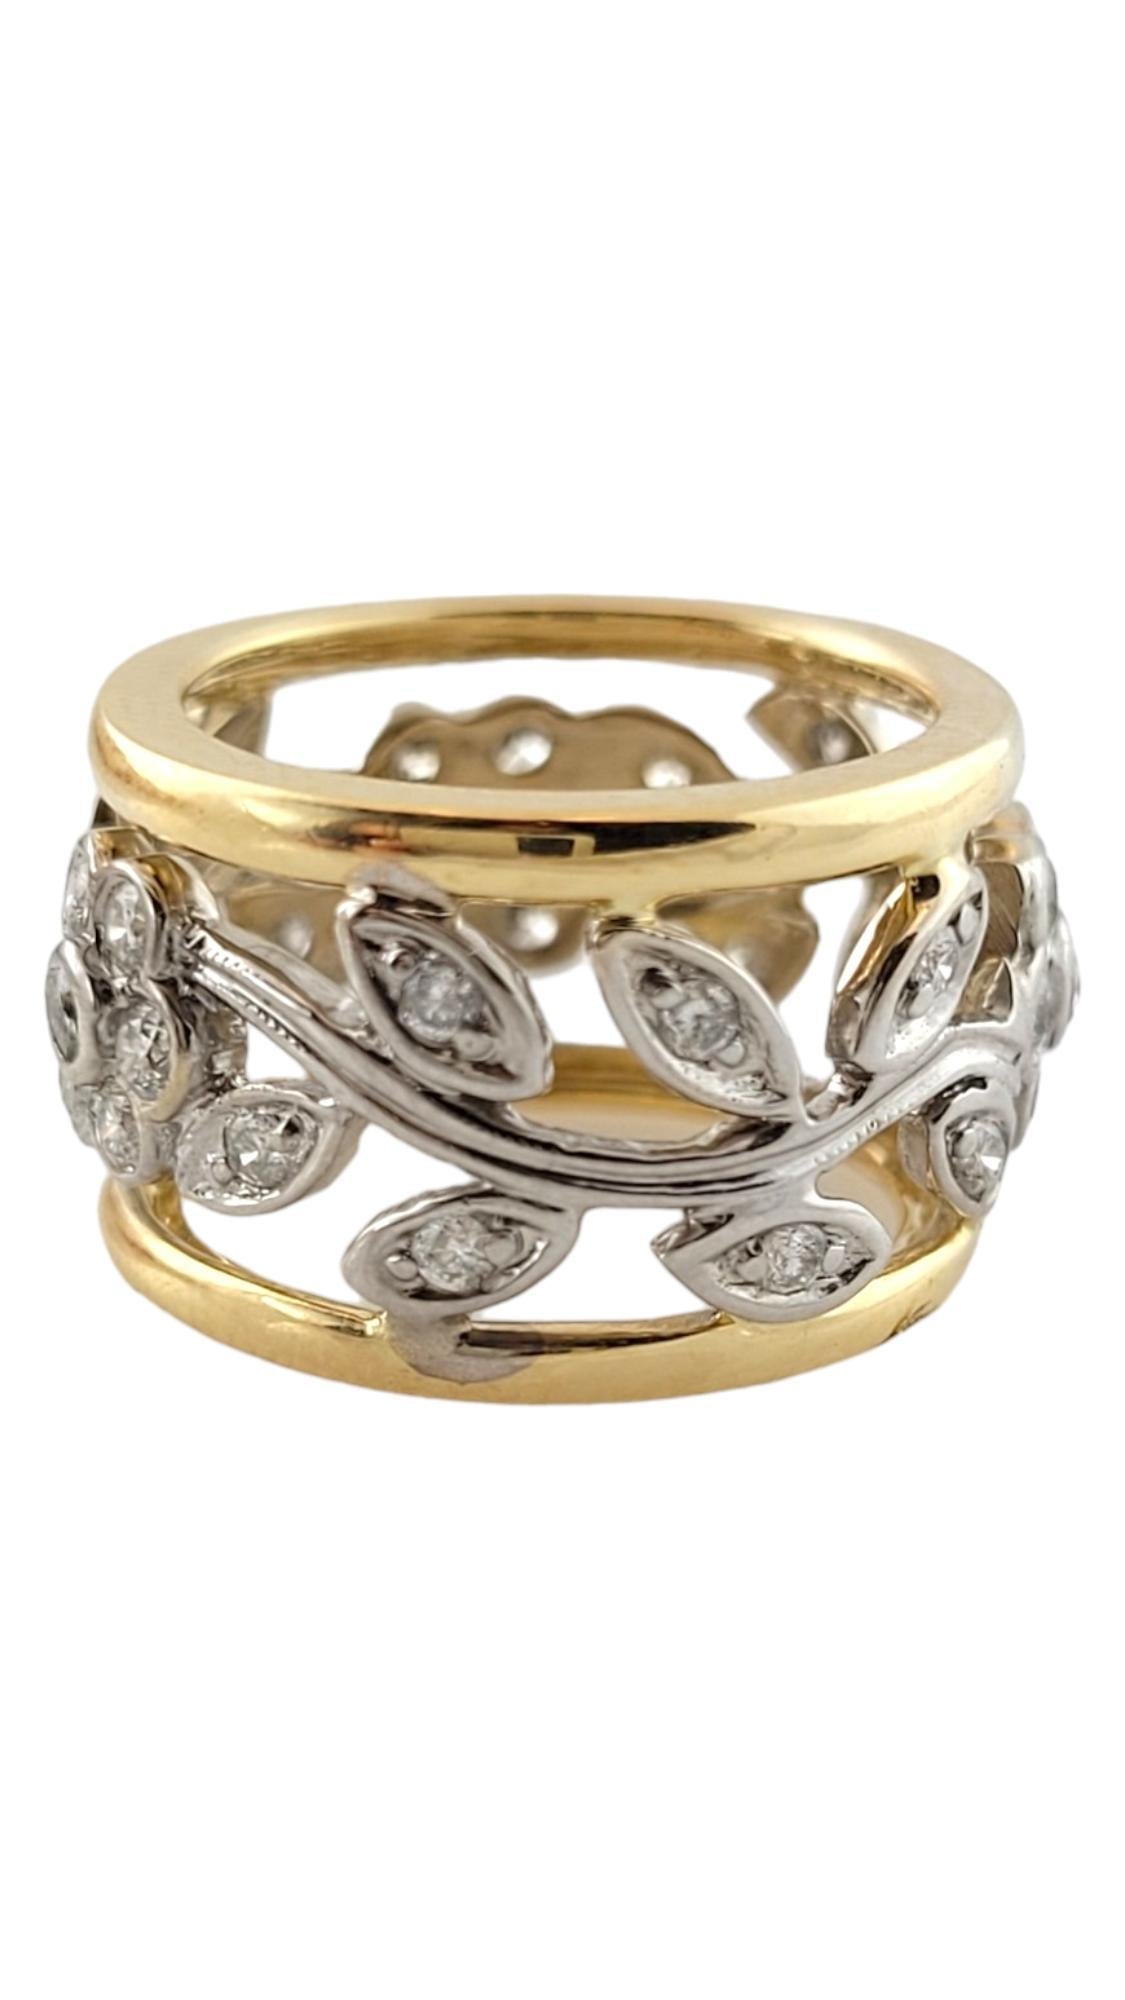 Vintage 14K Yellow and White Gold Diamond Floral Ring Size 3.5

This gorgeous ring has a floral 14K white gold pattern bordered by 14K yellow gold and decorated with 35 sparkling round brilliant cut diamonds!

Approximate total diamond weight: 0.85